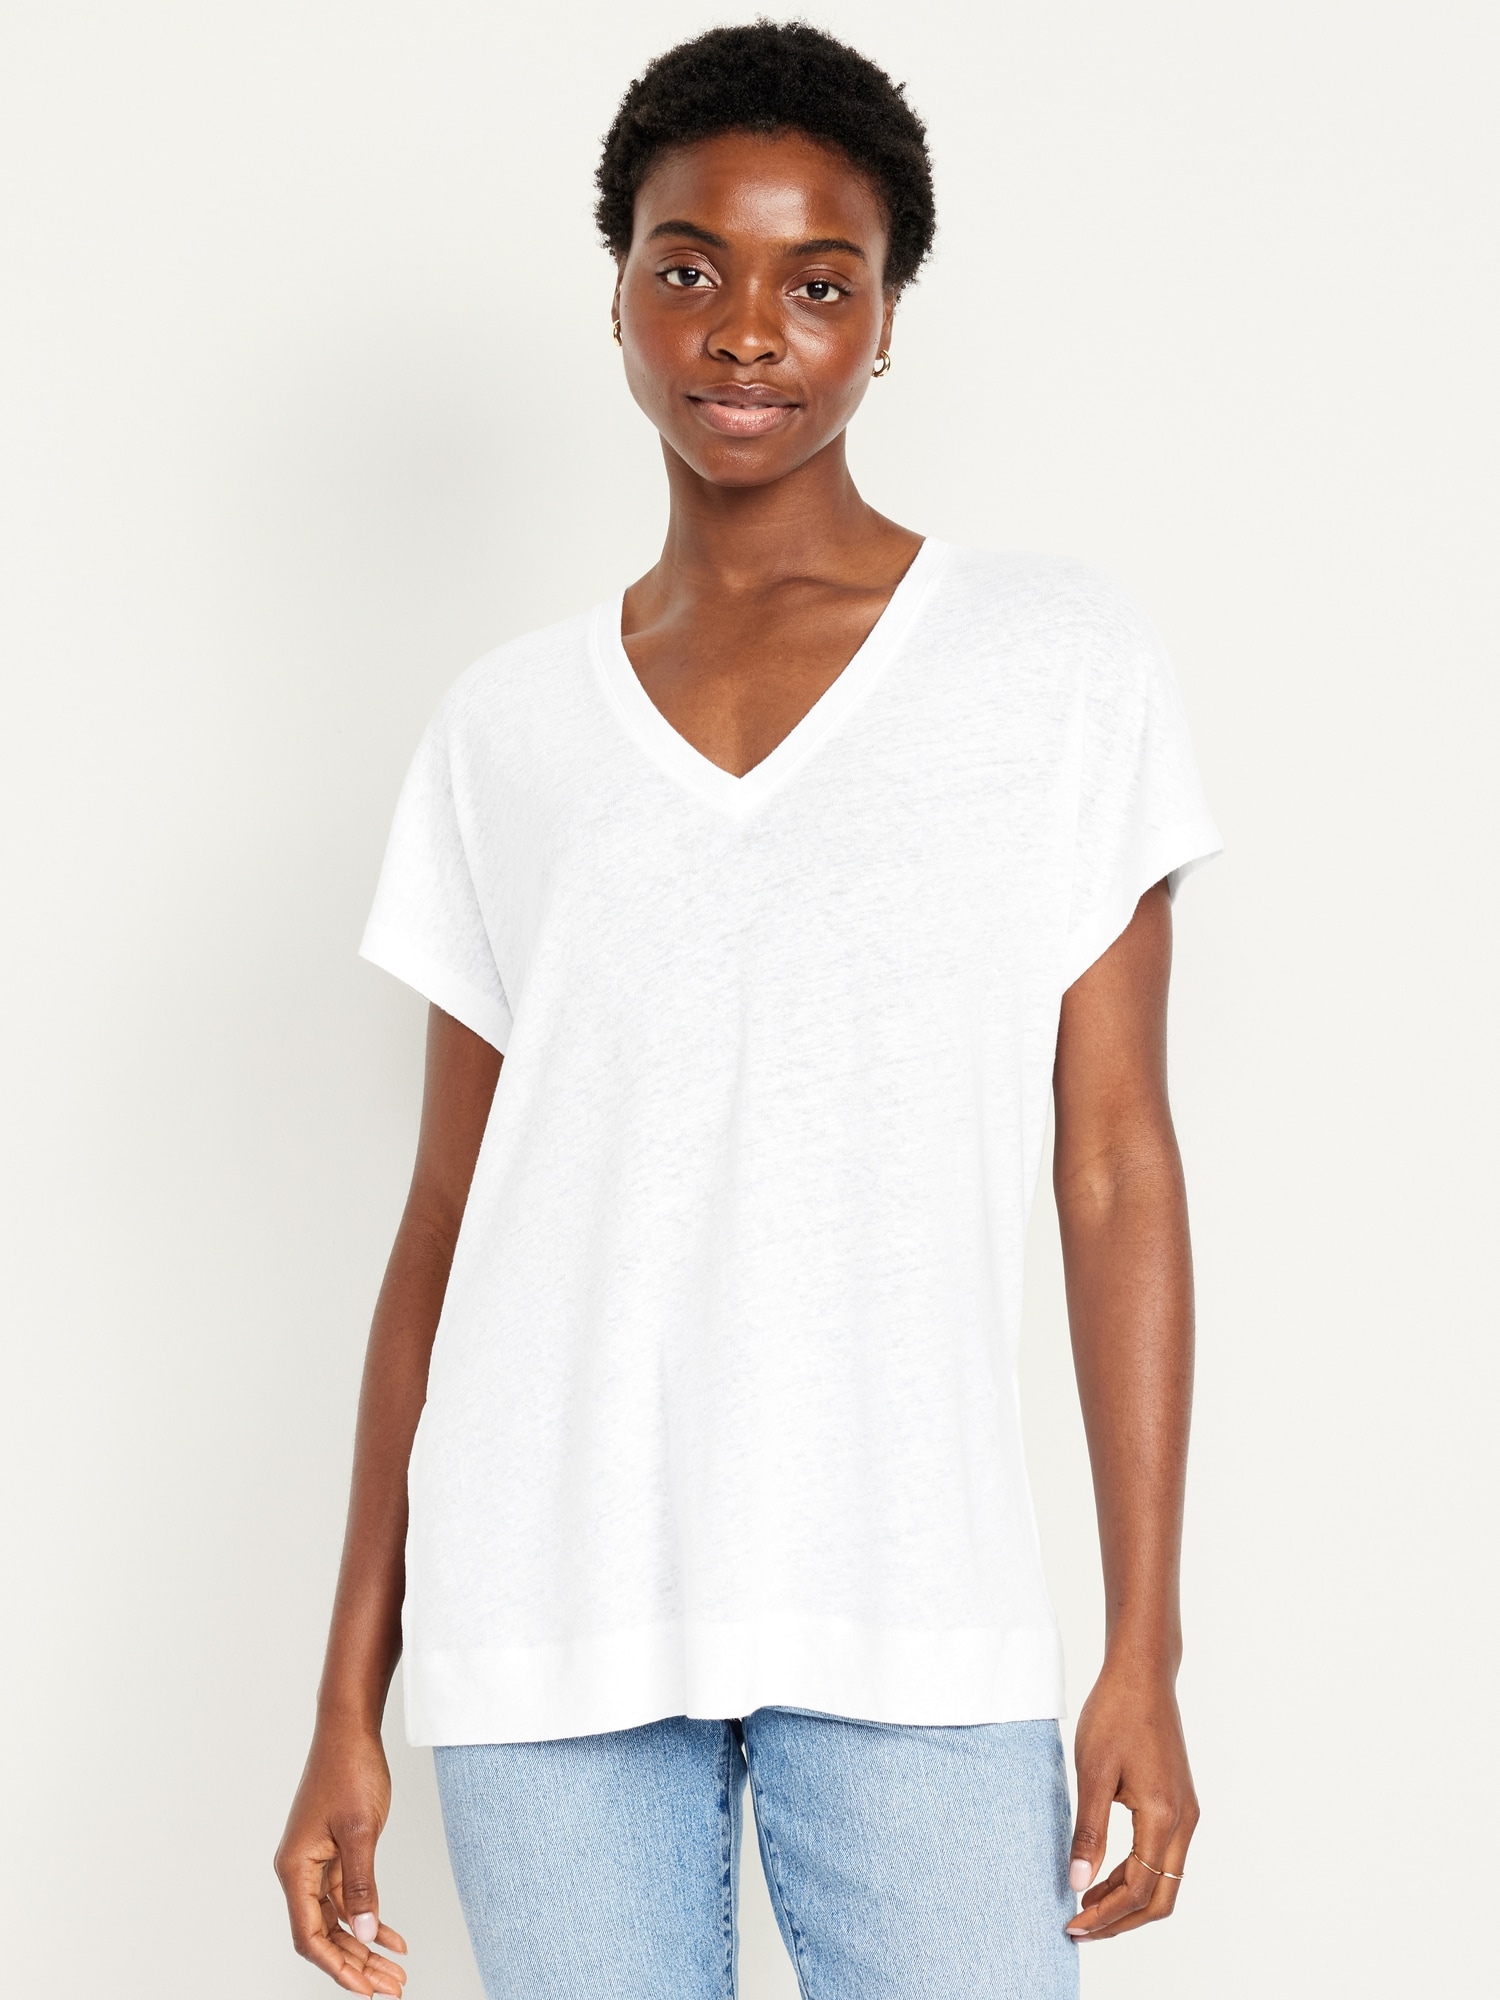 Oversized T-Shirts for Women